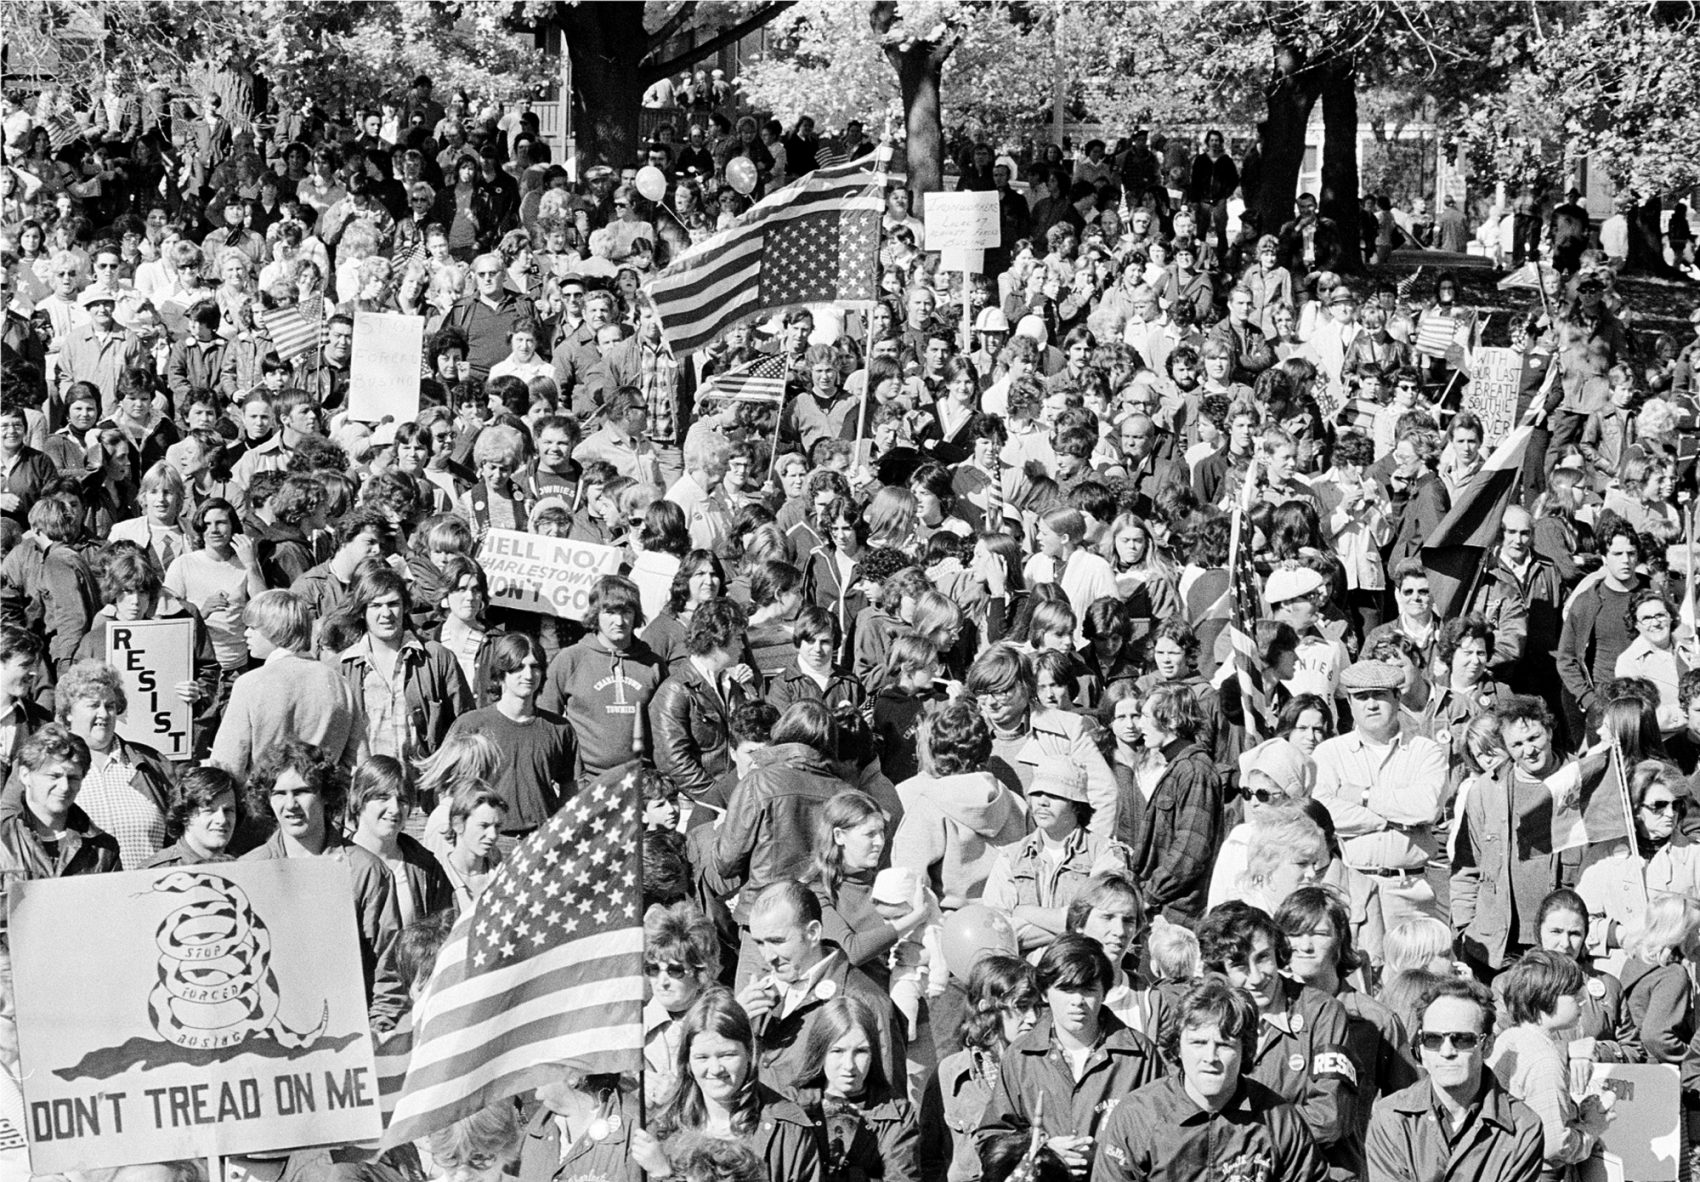 Is it possible, writes Lindsey Danis, that the recent uptick in hate crimes in the state can help Massachusetts finally get over its history of hate? Pictured: An estimated 7,000 marchers gather to protest forced school busing in South Boston, Ma., Monday, Oct. 27, 1975. The rally coincides with a boycott of schools by most white students. (Peter Bregg/AP)